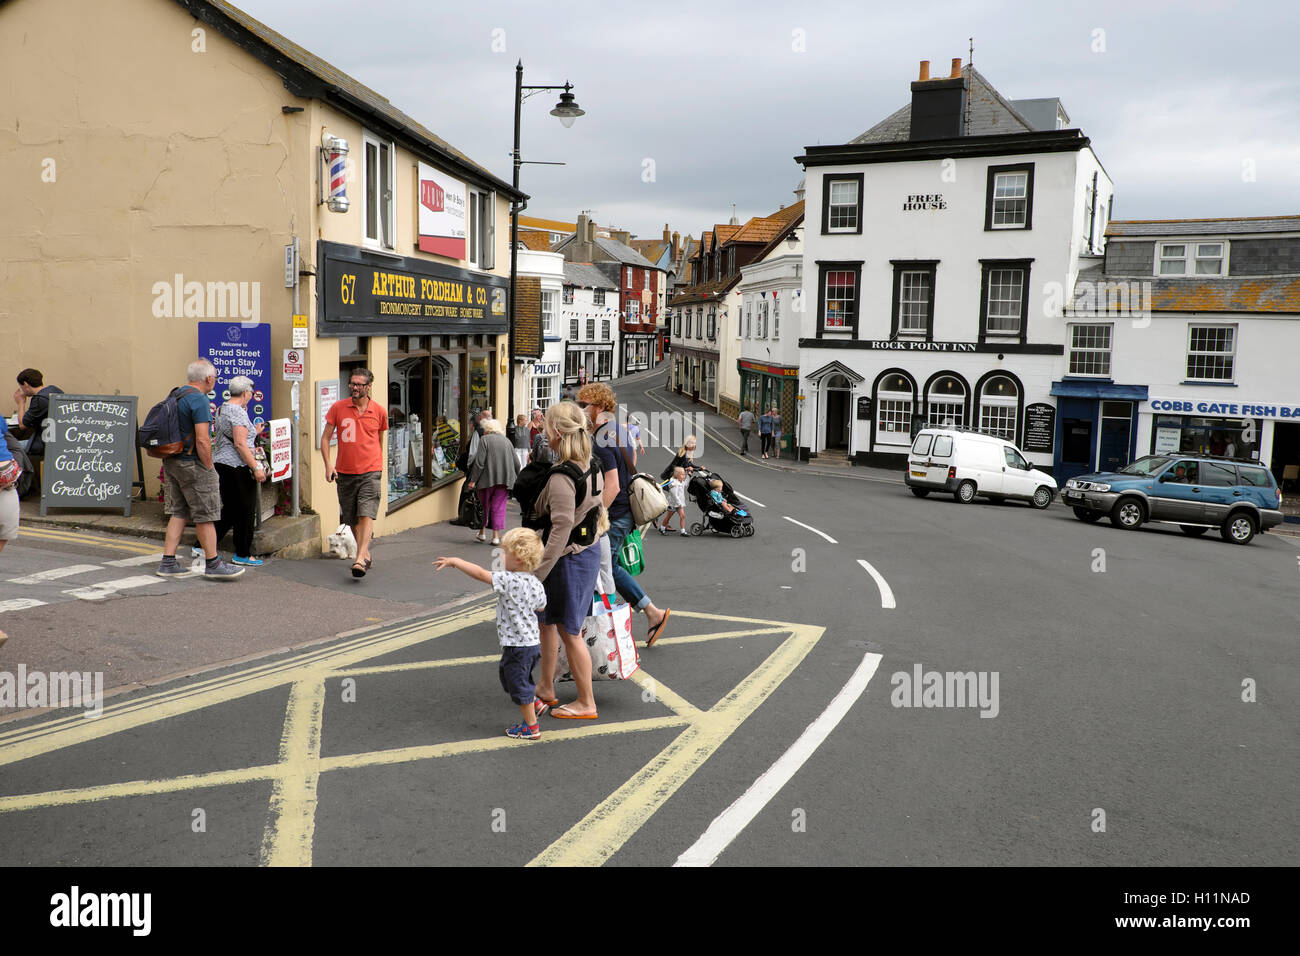 People crossing the street from the Square at Lyme Regis, Dorset, England UK    KATHY DEWITT Stock Photo